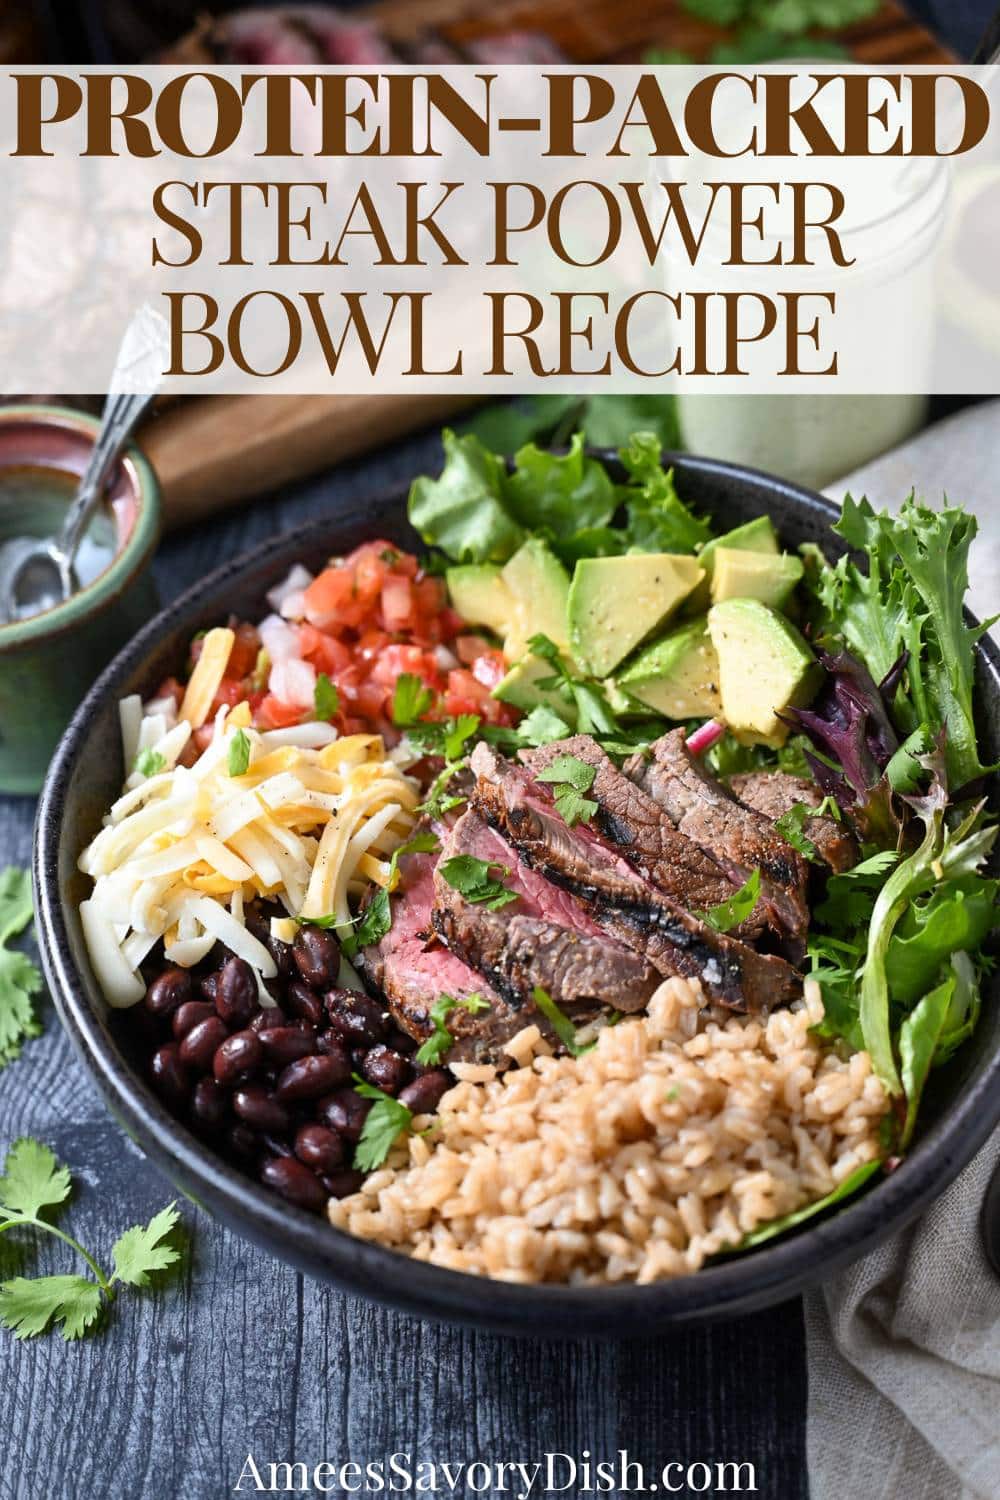 This Southwest Steak Rice Bowl showcases juicy slices of seared steak served over a crisp bed of lettuce greens along with brown rice, black beans, avocado, pico de gallo, cheese, and a creamy cilantro lime dressing. via @Ameessavorydish